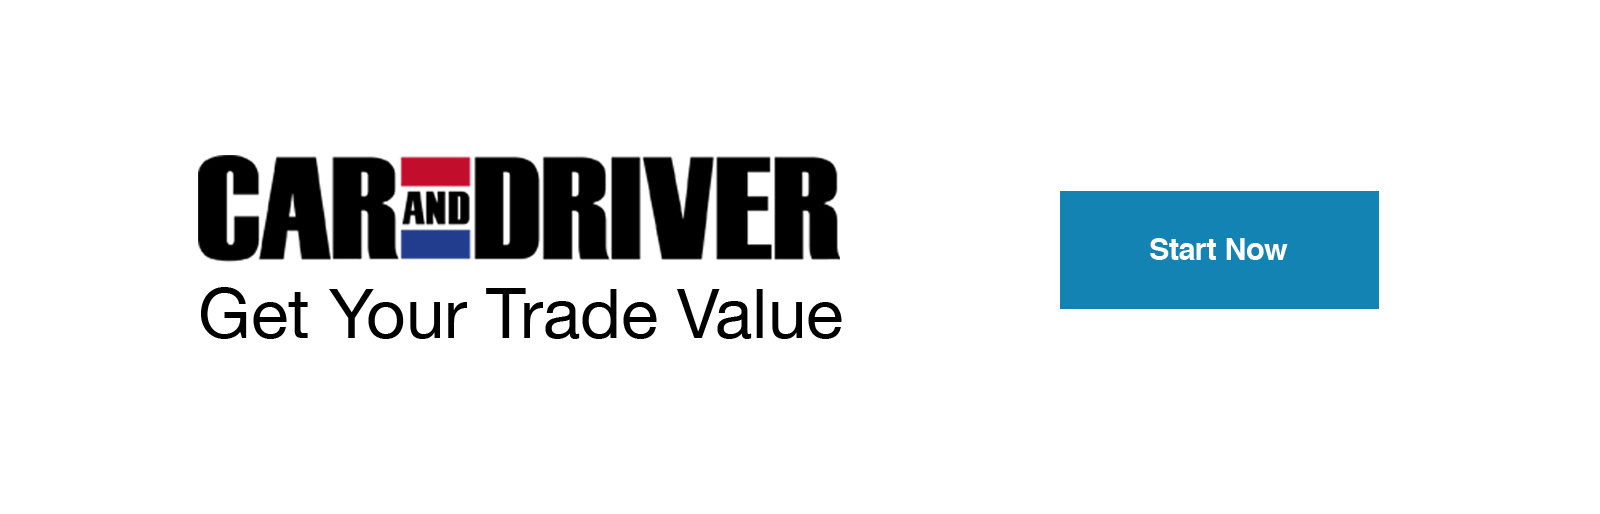 Car and Driver Value Your Trade